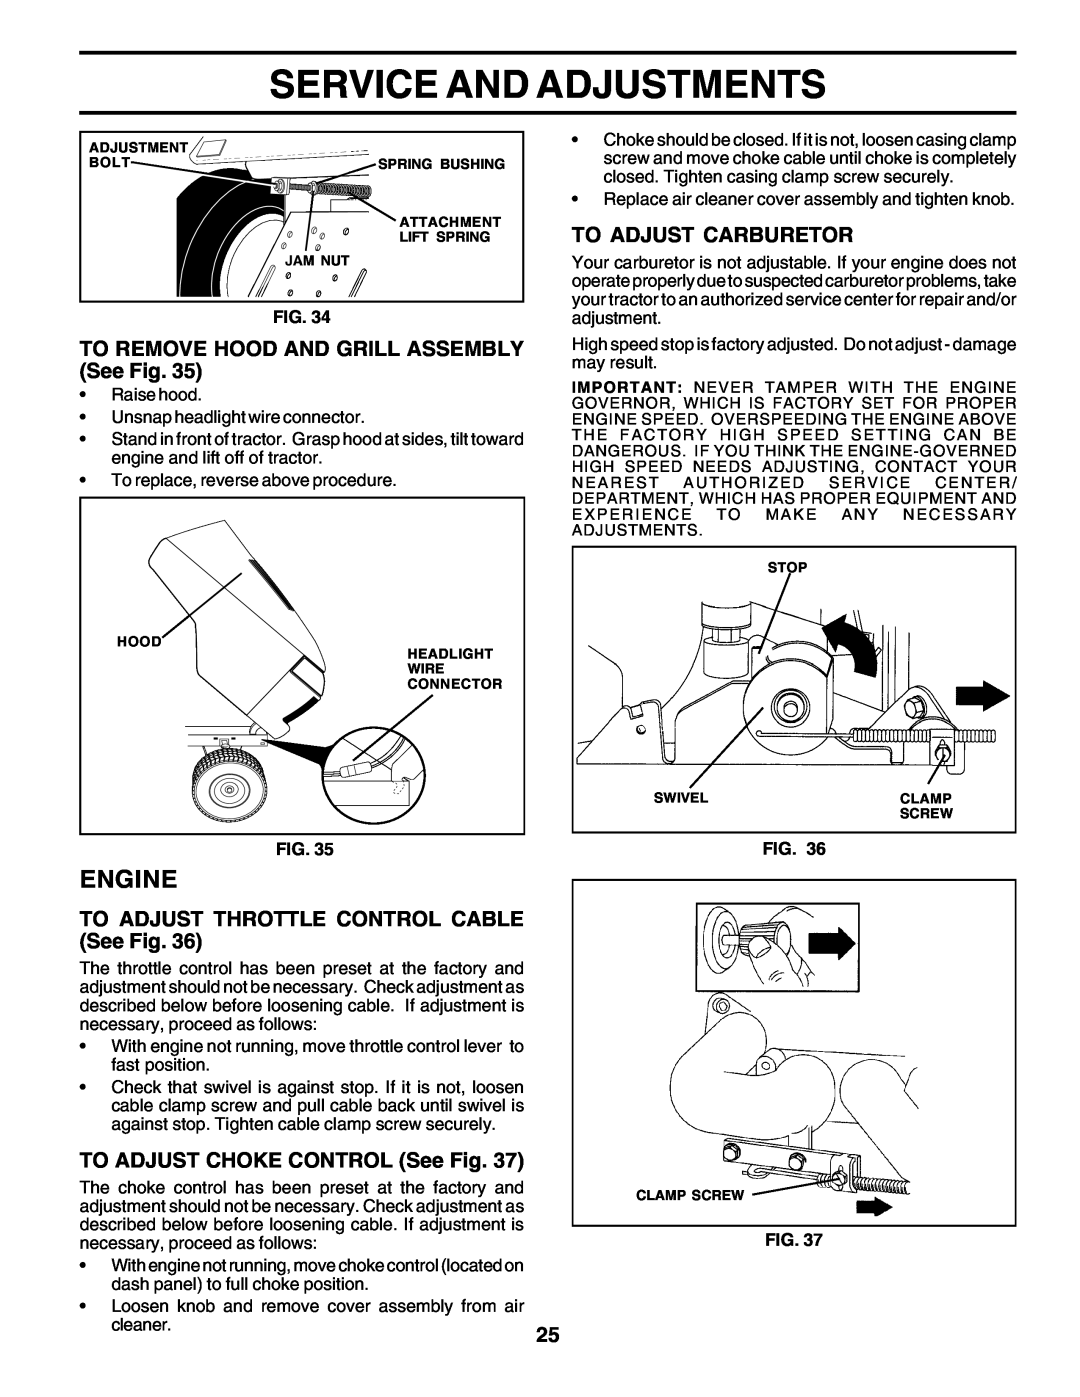 Poulan 177271 owner manual Service And Adjustments, Engine, TO REMOVE HOOD AND GRILL ASSEMBLY See Fig, To Adjust Carburetor 